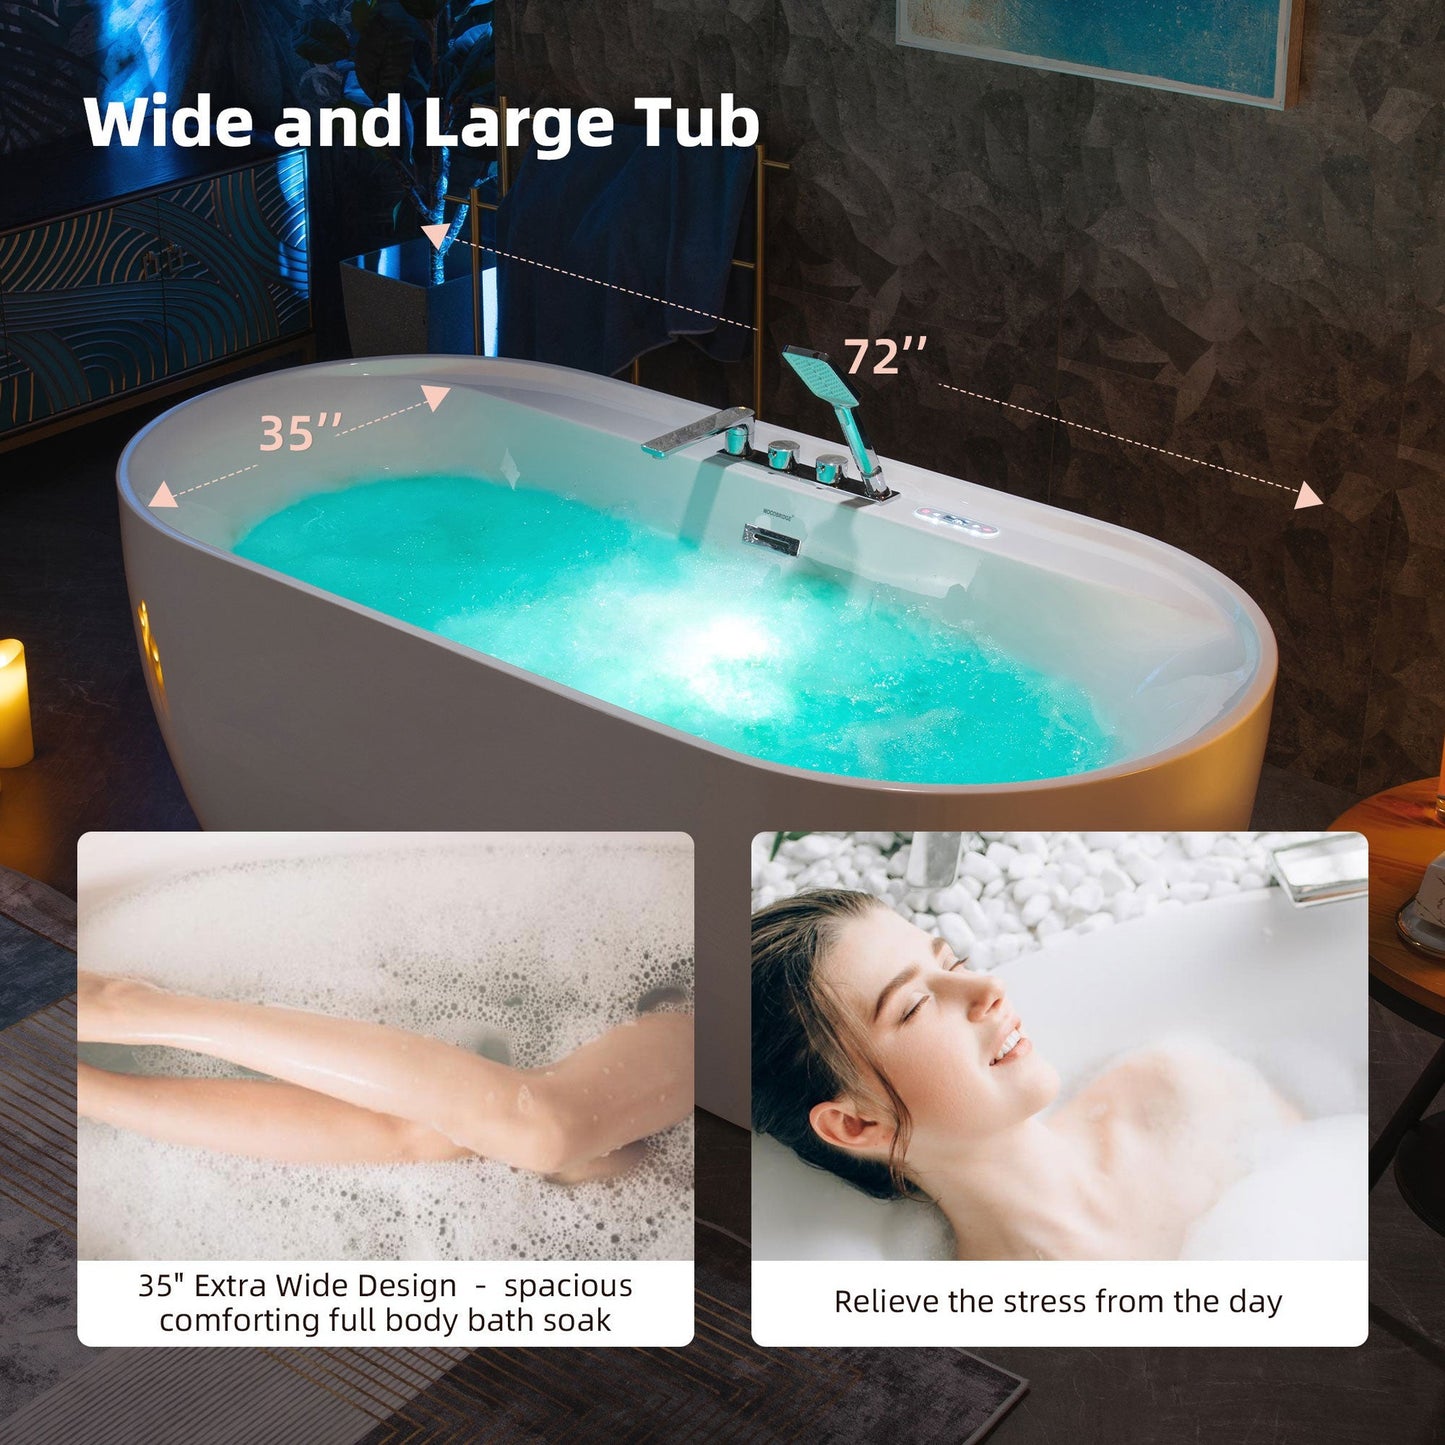 WoodBridge BJ500+F0041CH 72" White Whirlpool and Air Bath Heated Soaking Combination Tub With Adjustable Speed Air Blower, Tub Filler and Display Control Panel